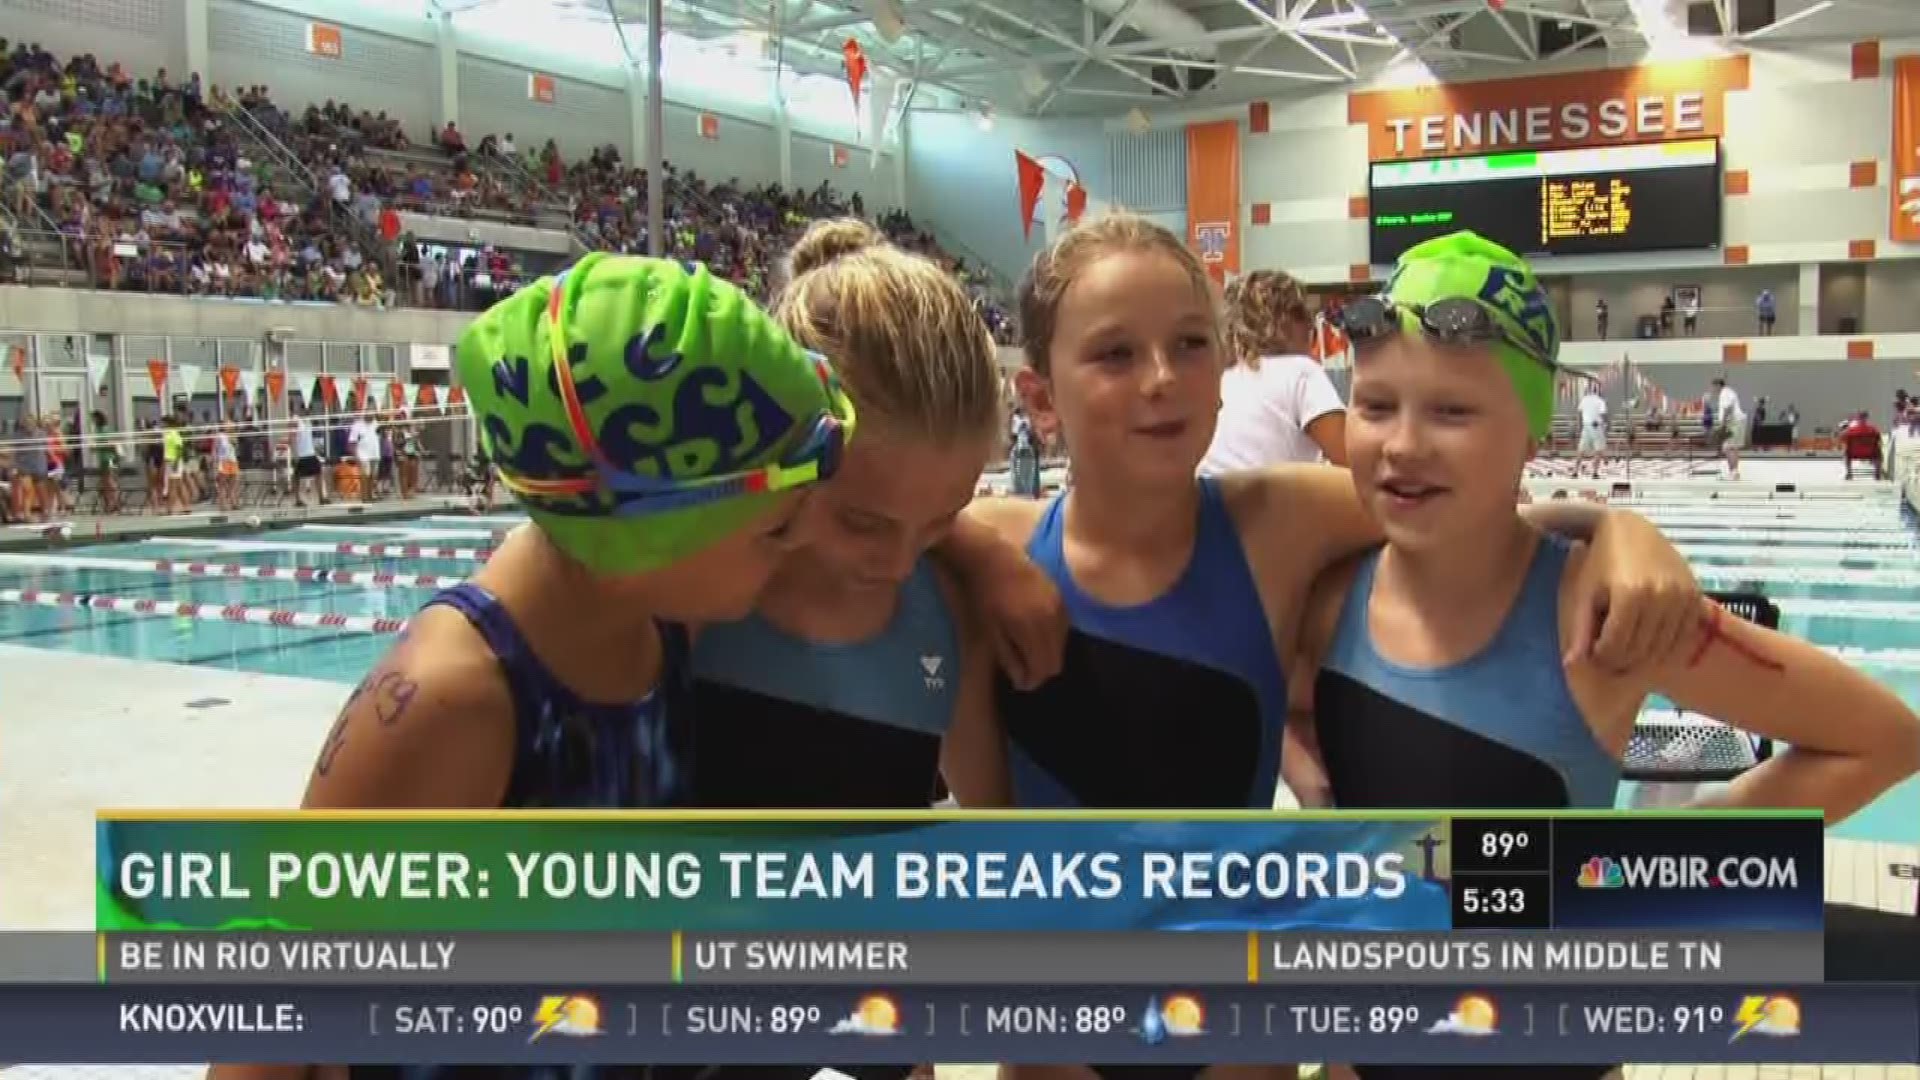 Young swimmers competing at UT have big Olympic dreams